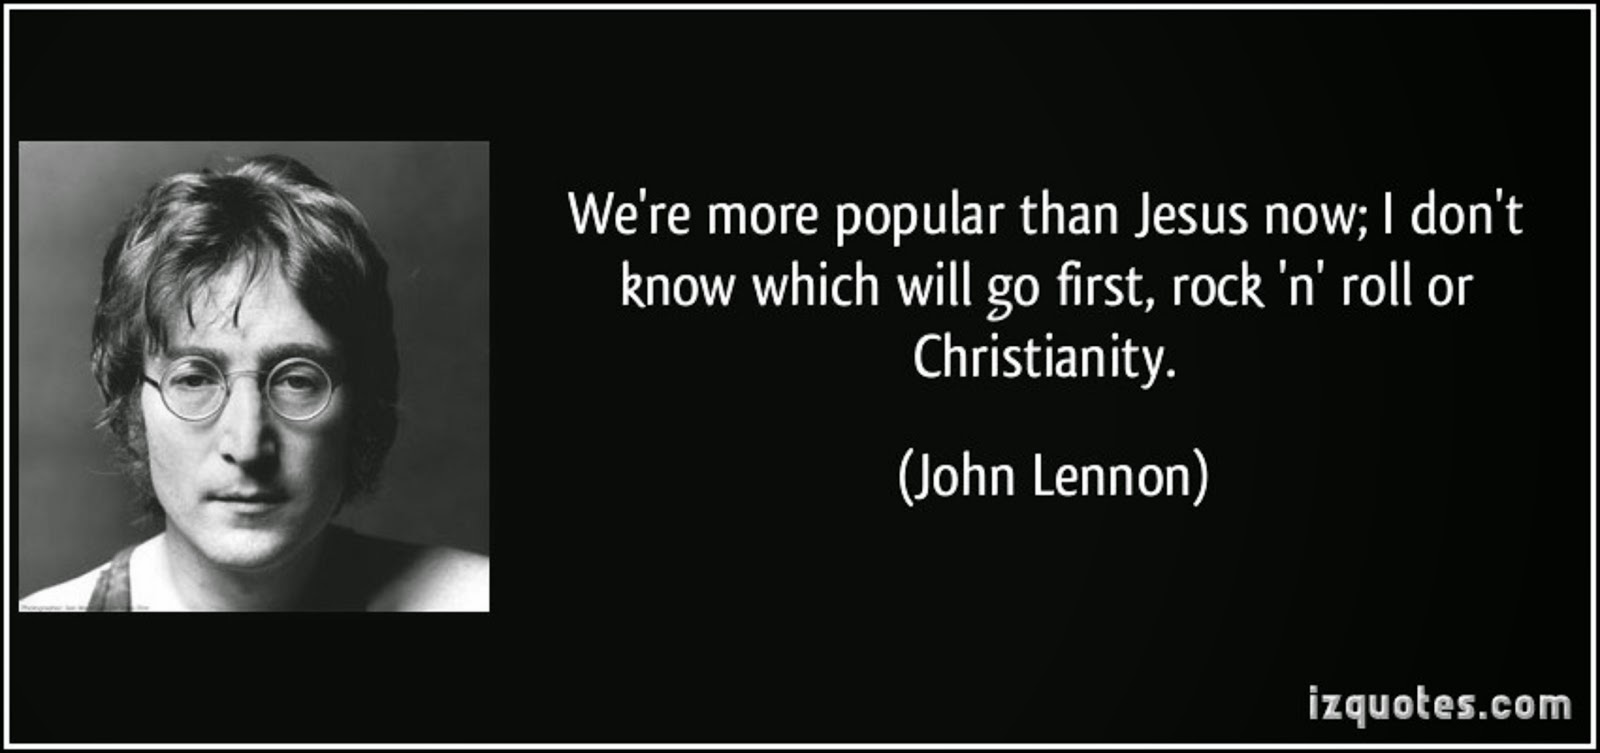 JOHN LENNON BOASTS THAT THE BEATLES ARE GREATER THAN JESUS